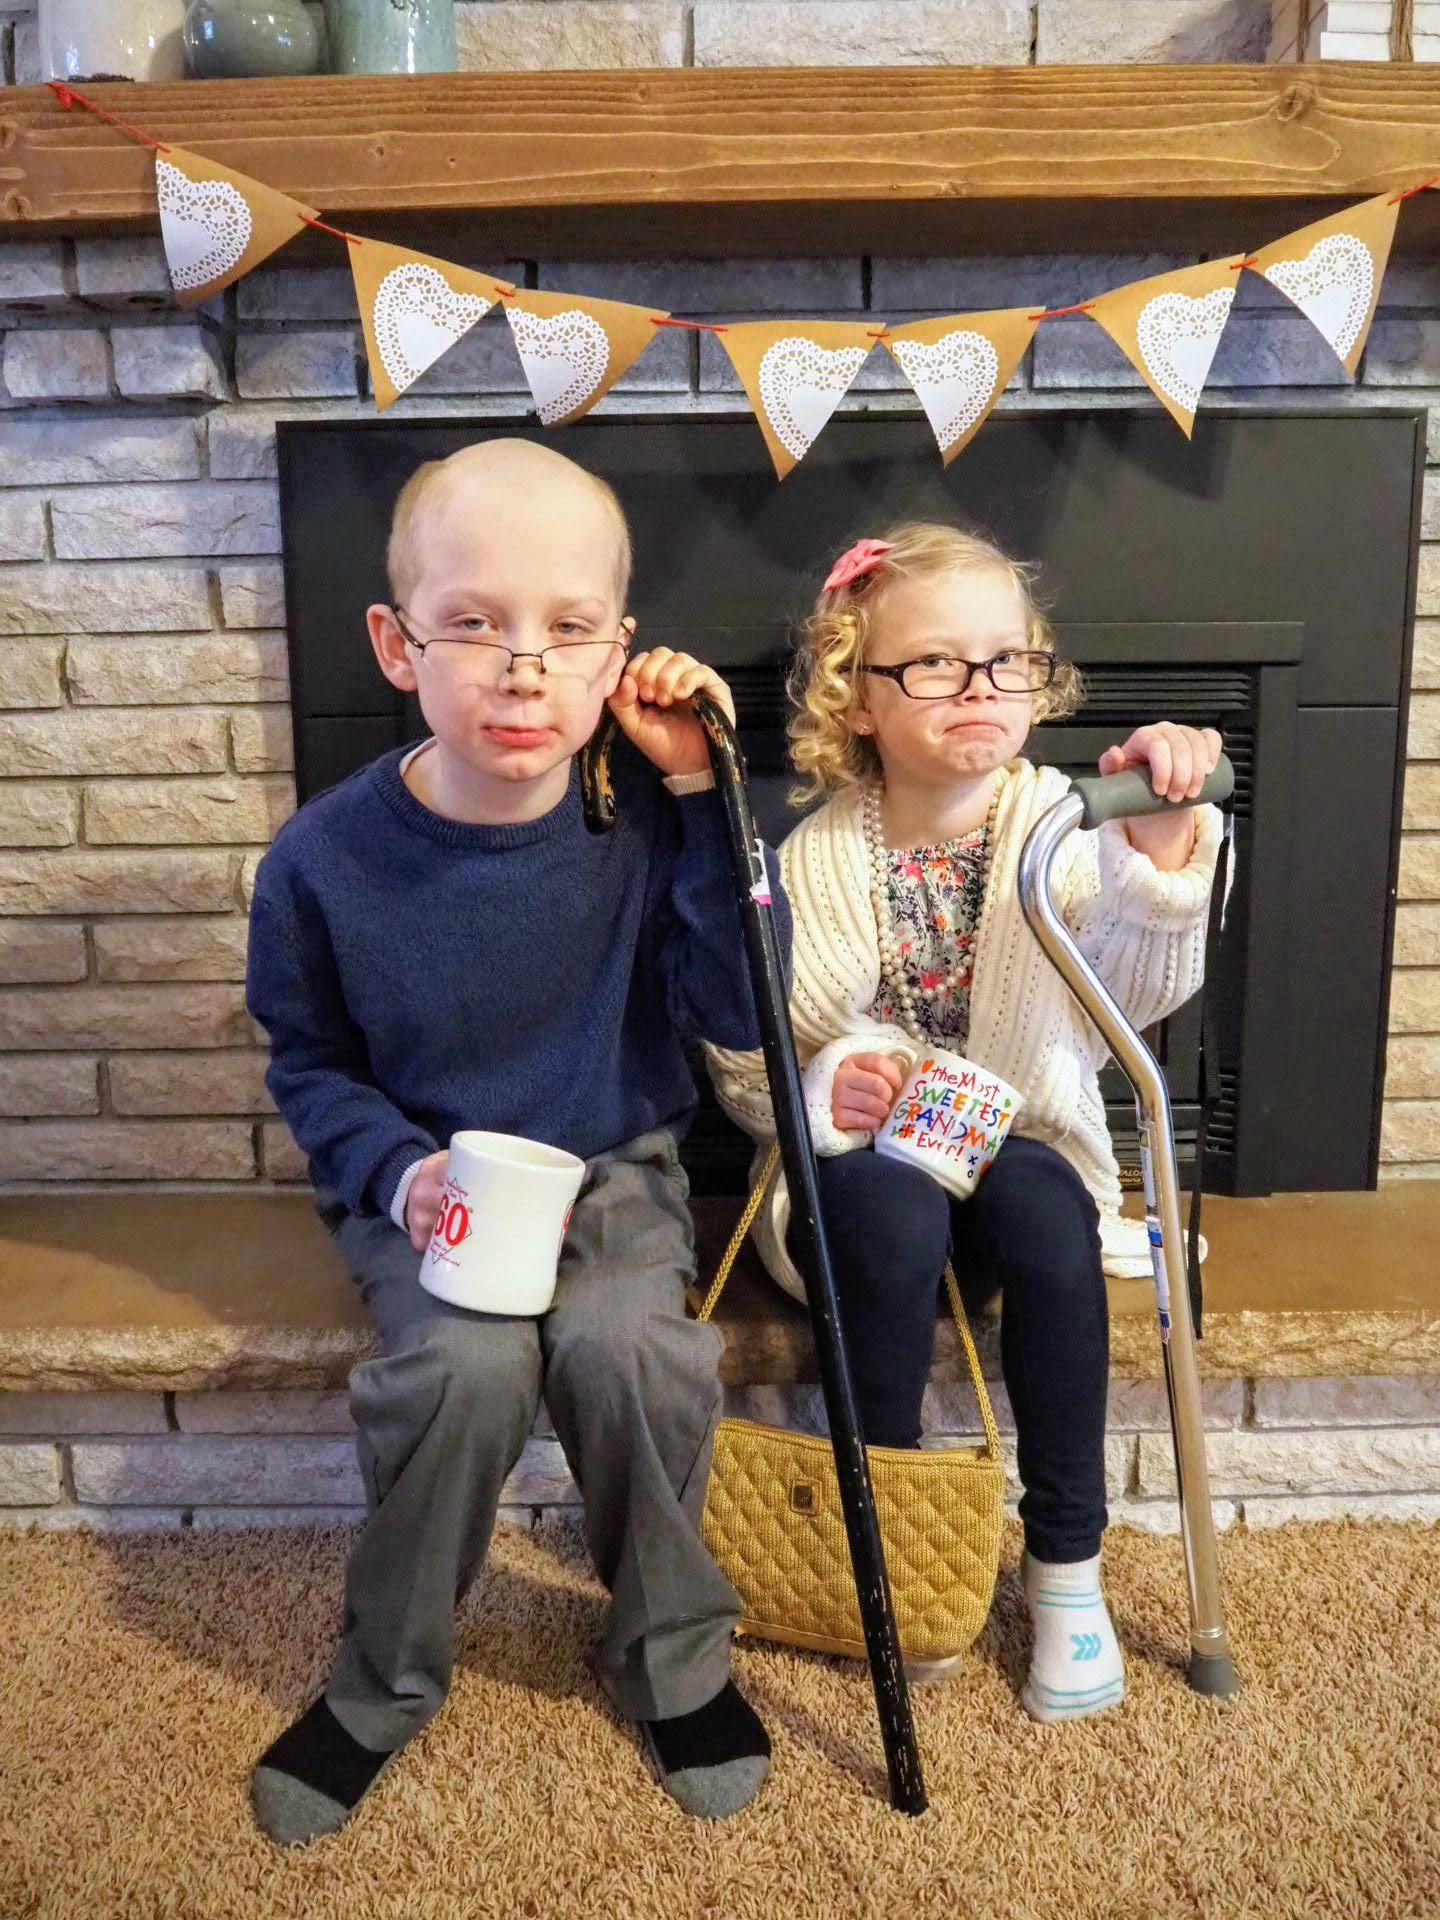 My kids went all-out for Senior Citizens day at school.